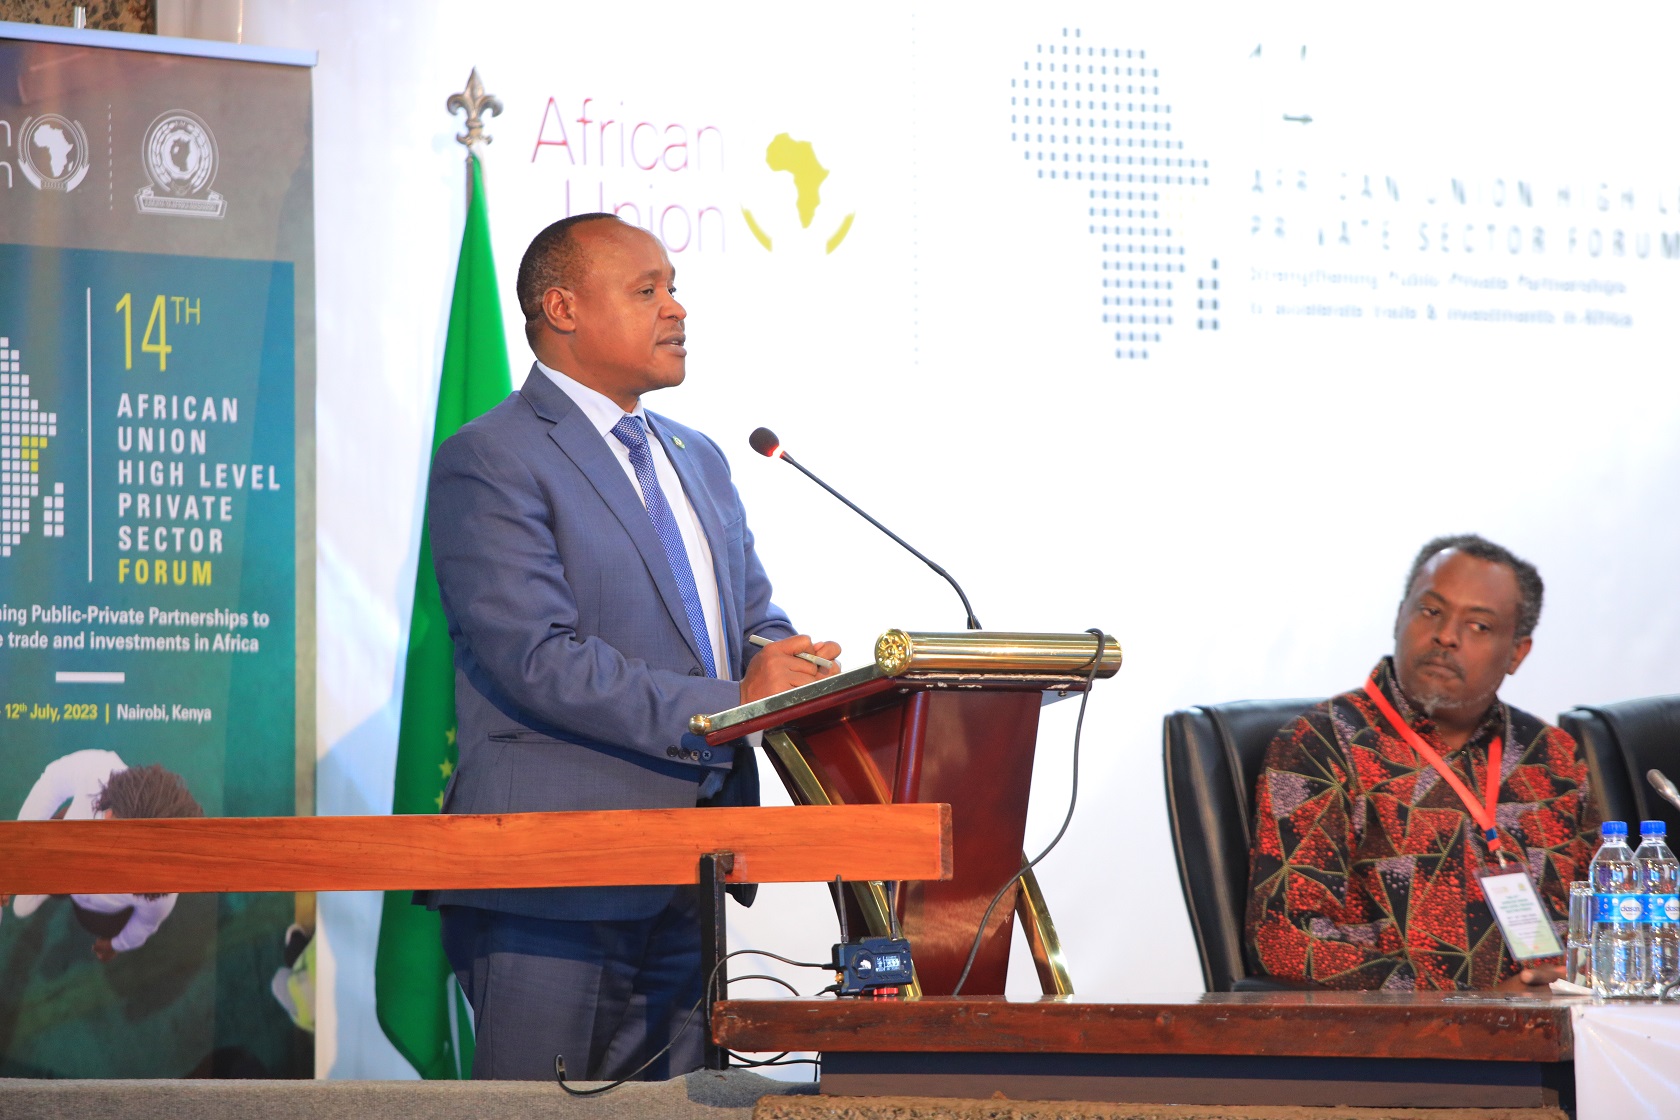 EAC Secretary General Hon. (Dr.) Peter Mathuki addresses delegates during the closing session of the 14th African Union High Level Private Sector Forum in Nairobi, Kenya.